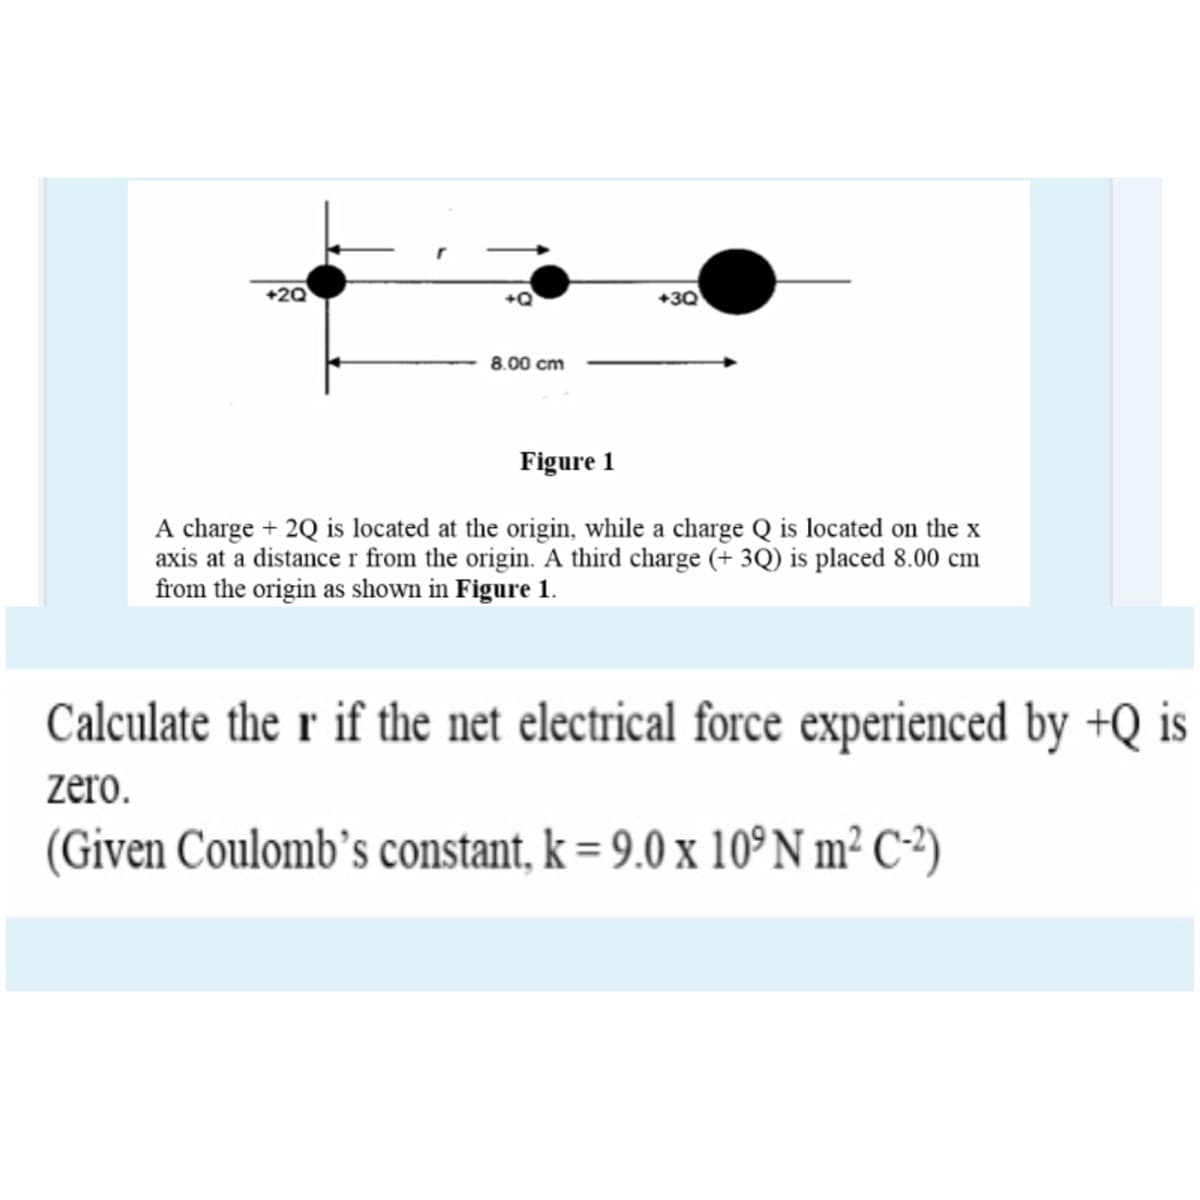 +3Q
8.00 cm
Figure 1
A charge + 2Q is located at the origin, while a charge Q is located on the x
axis at a distance r from the origin. A third charge (+ 3Q) is placed 8.00 cm
from the origin as shown in Figure 1.
Calculate the r if the net electrical force experienced by +Q is
zero.
(Given Coulomb's constant, k = 9.0 x 10° N m² C²)
